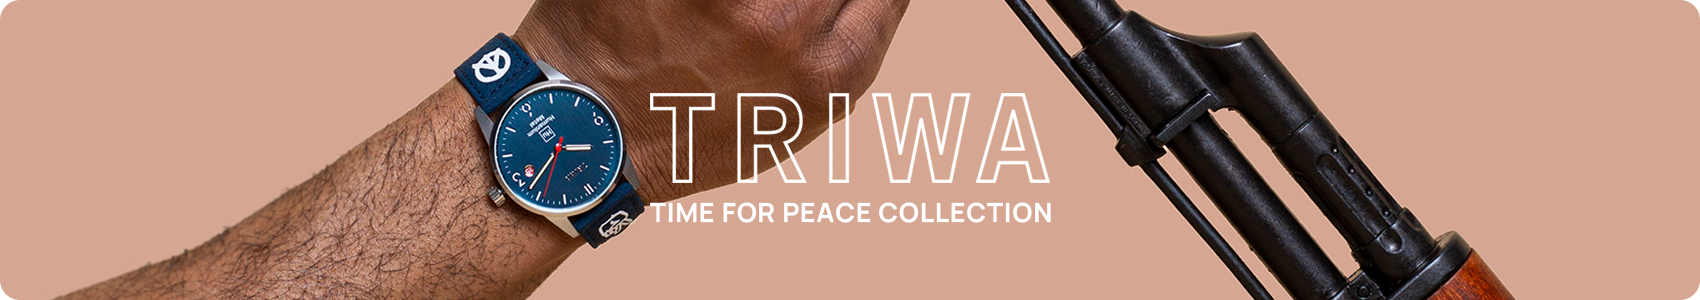 TRIWA TIME FOR PEACE COLLECTION